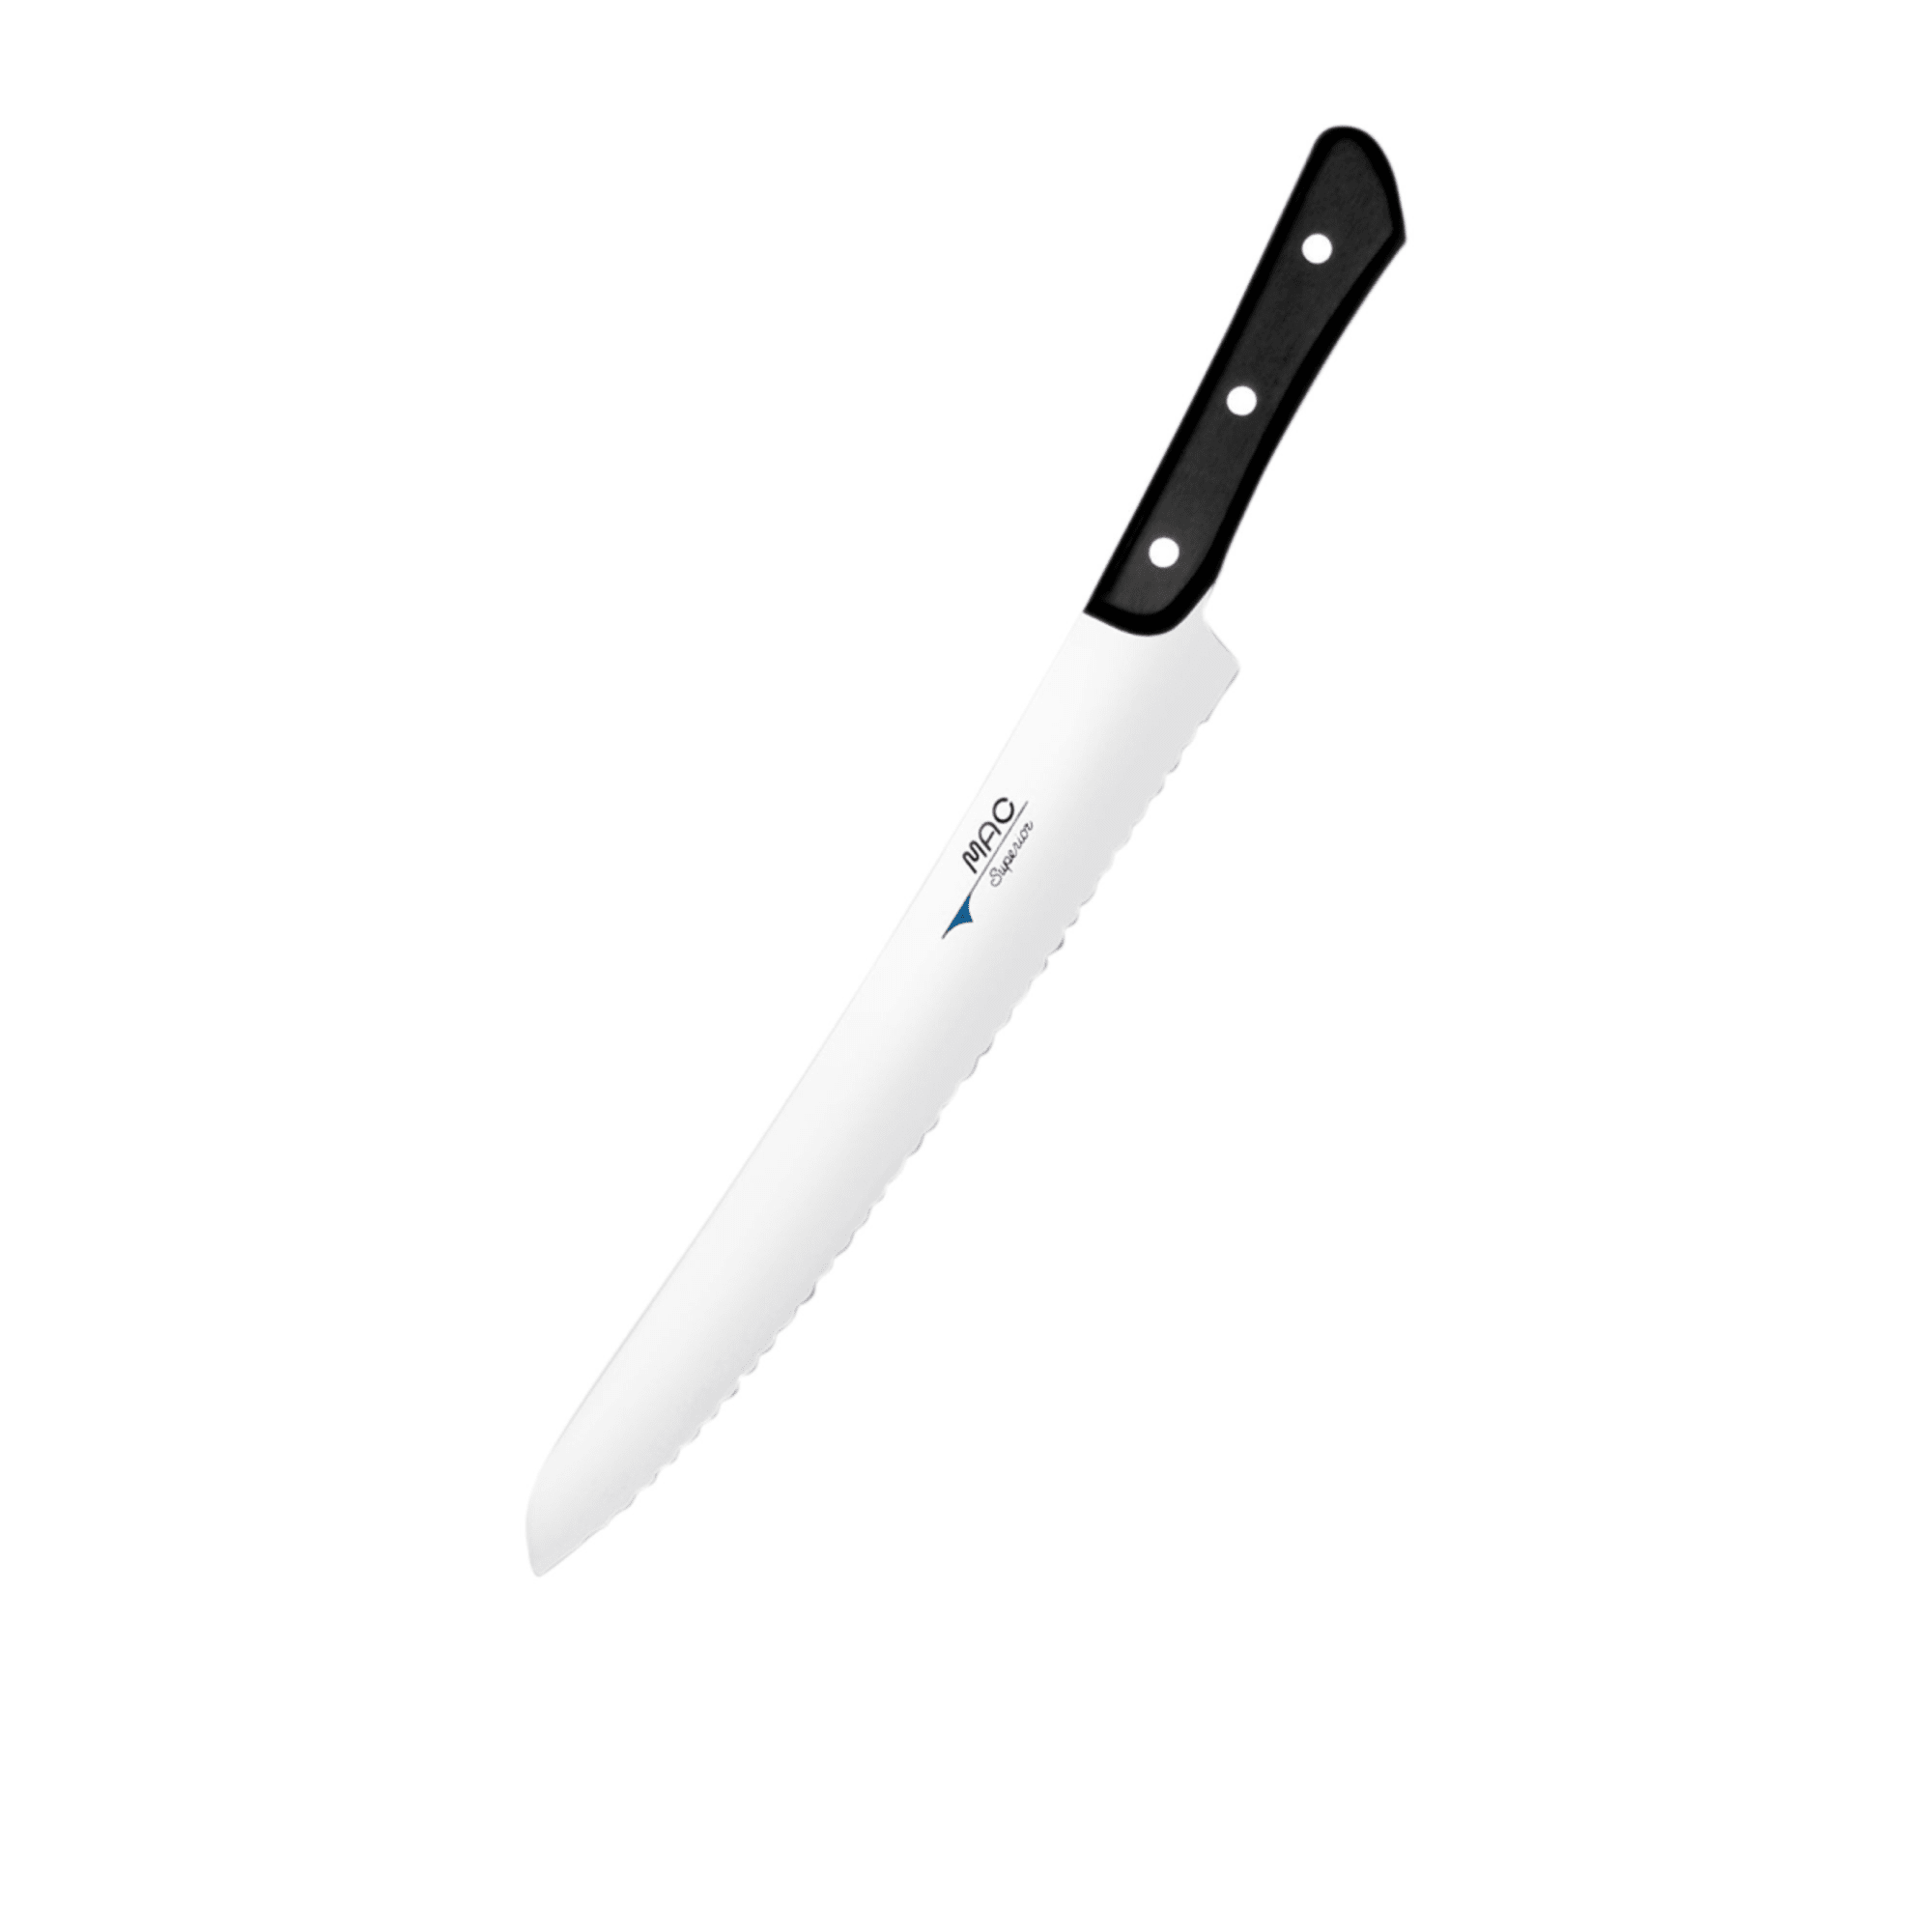 https://res.cloudinary.com/kitchenwarehouse/image/upload/c_fill,g_face,w_1250/f_auto/t_PDP_2000x2000/Supplier%20Images%20/2000px/MAC-Superior-Series-Bread-Knife-27cm_1_2000px.jpg?imagetype=pdp_full